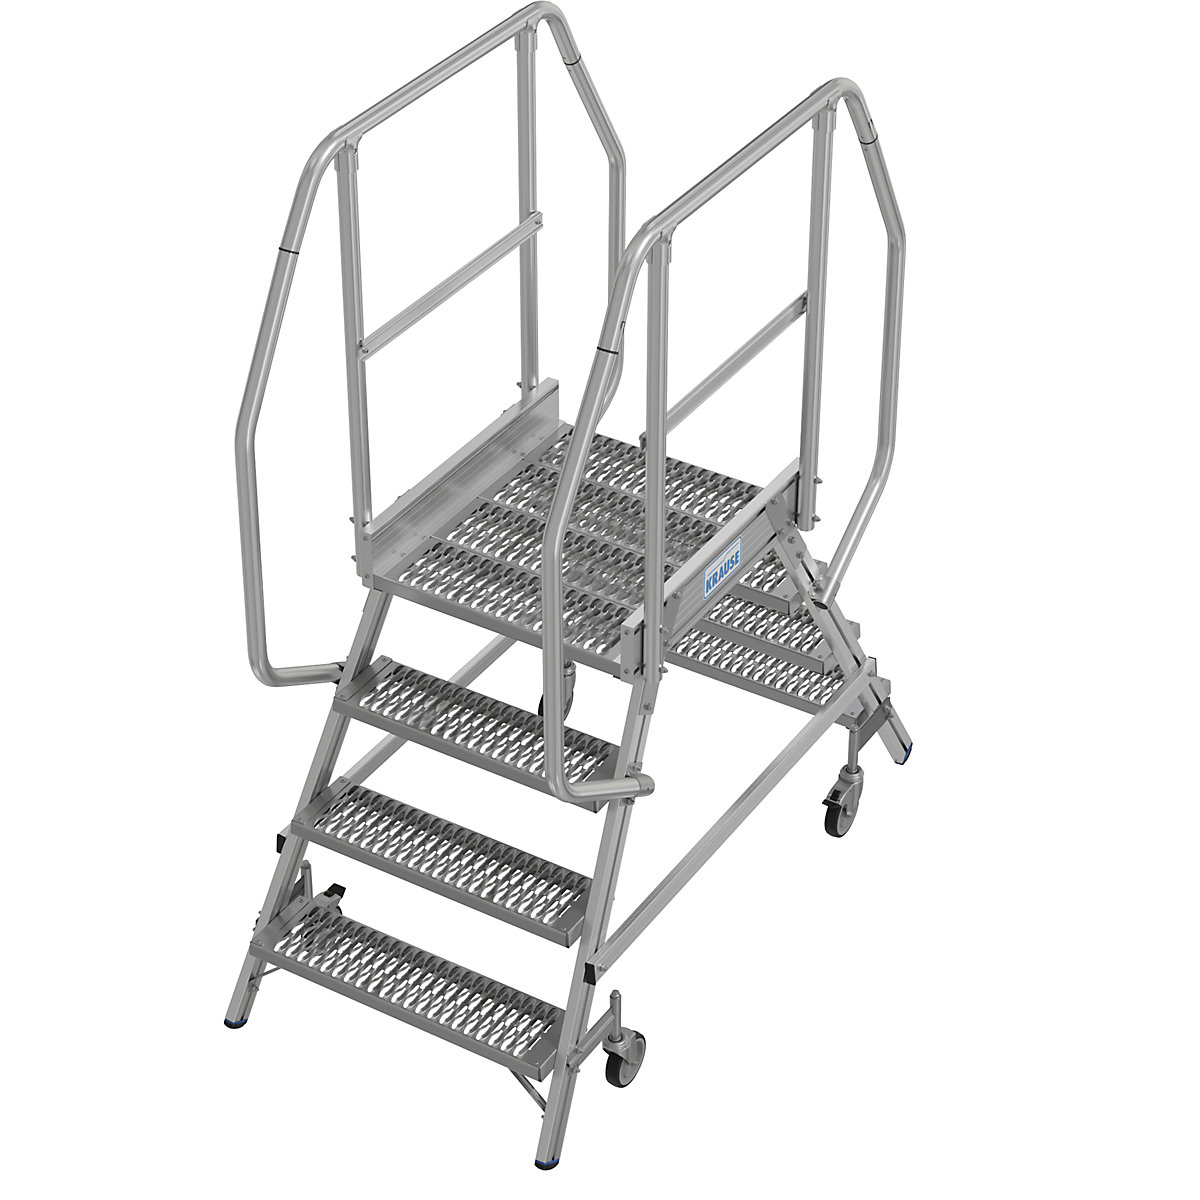 Mobile safety steps with R13 anti-slip properties – KRAUSE, with double sided access, 2x4 steps incl. platform-5